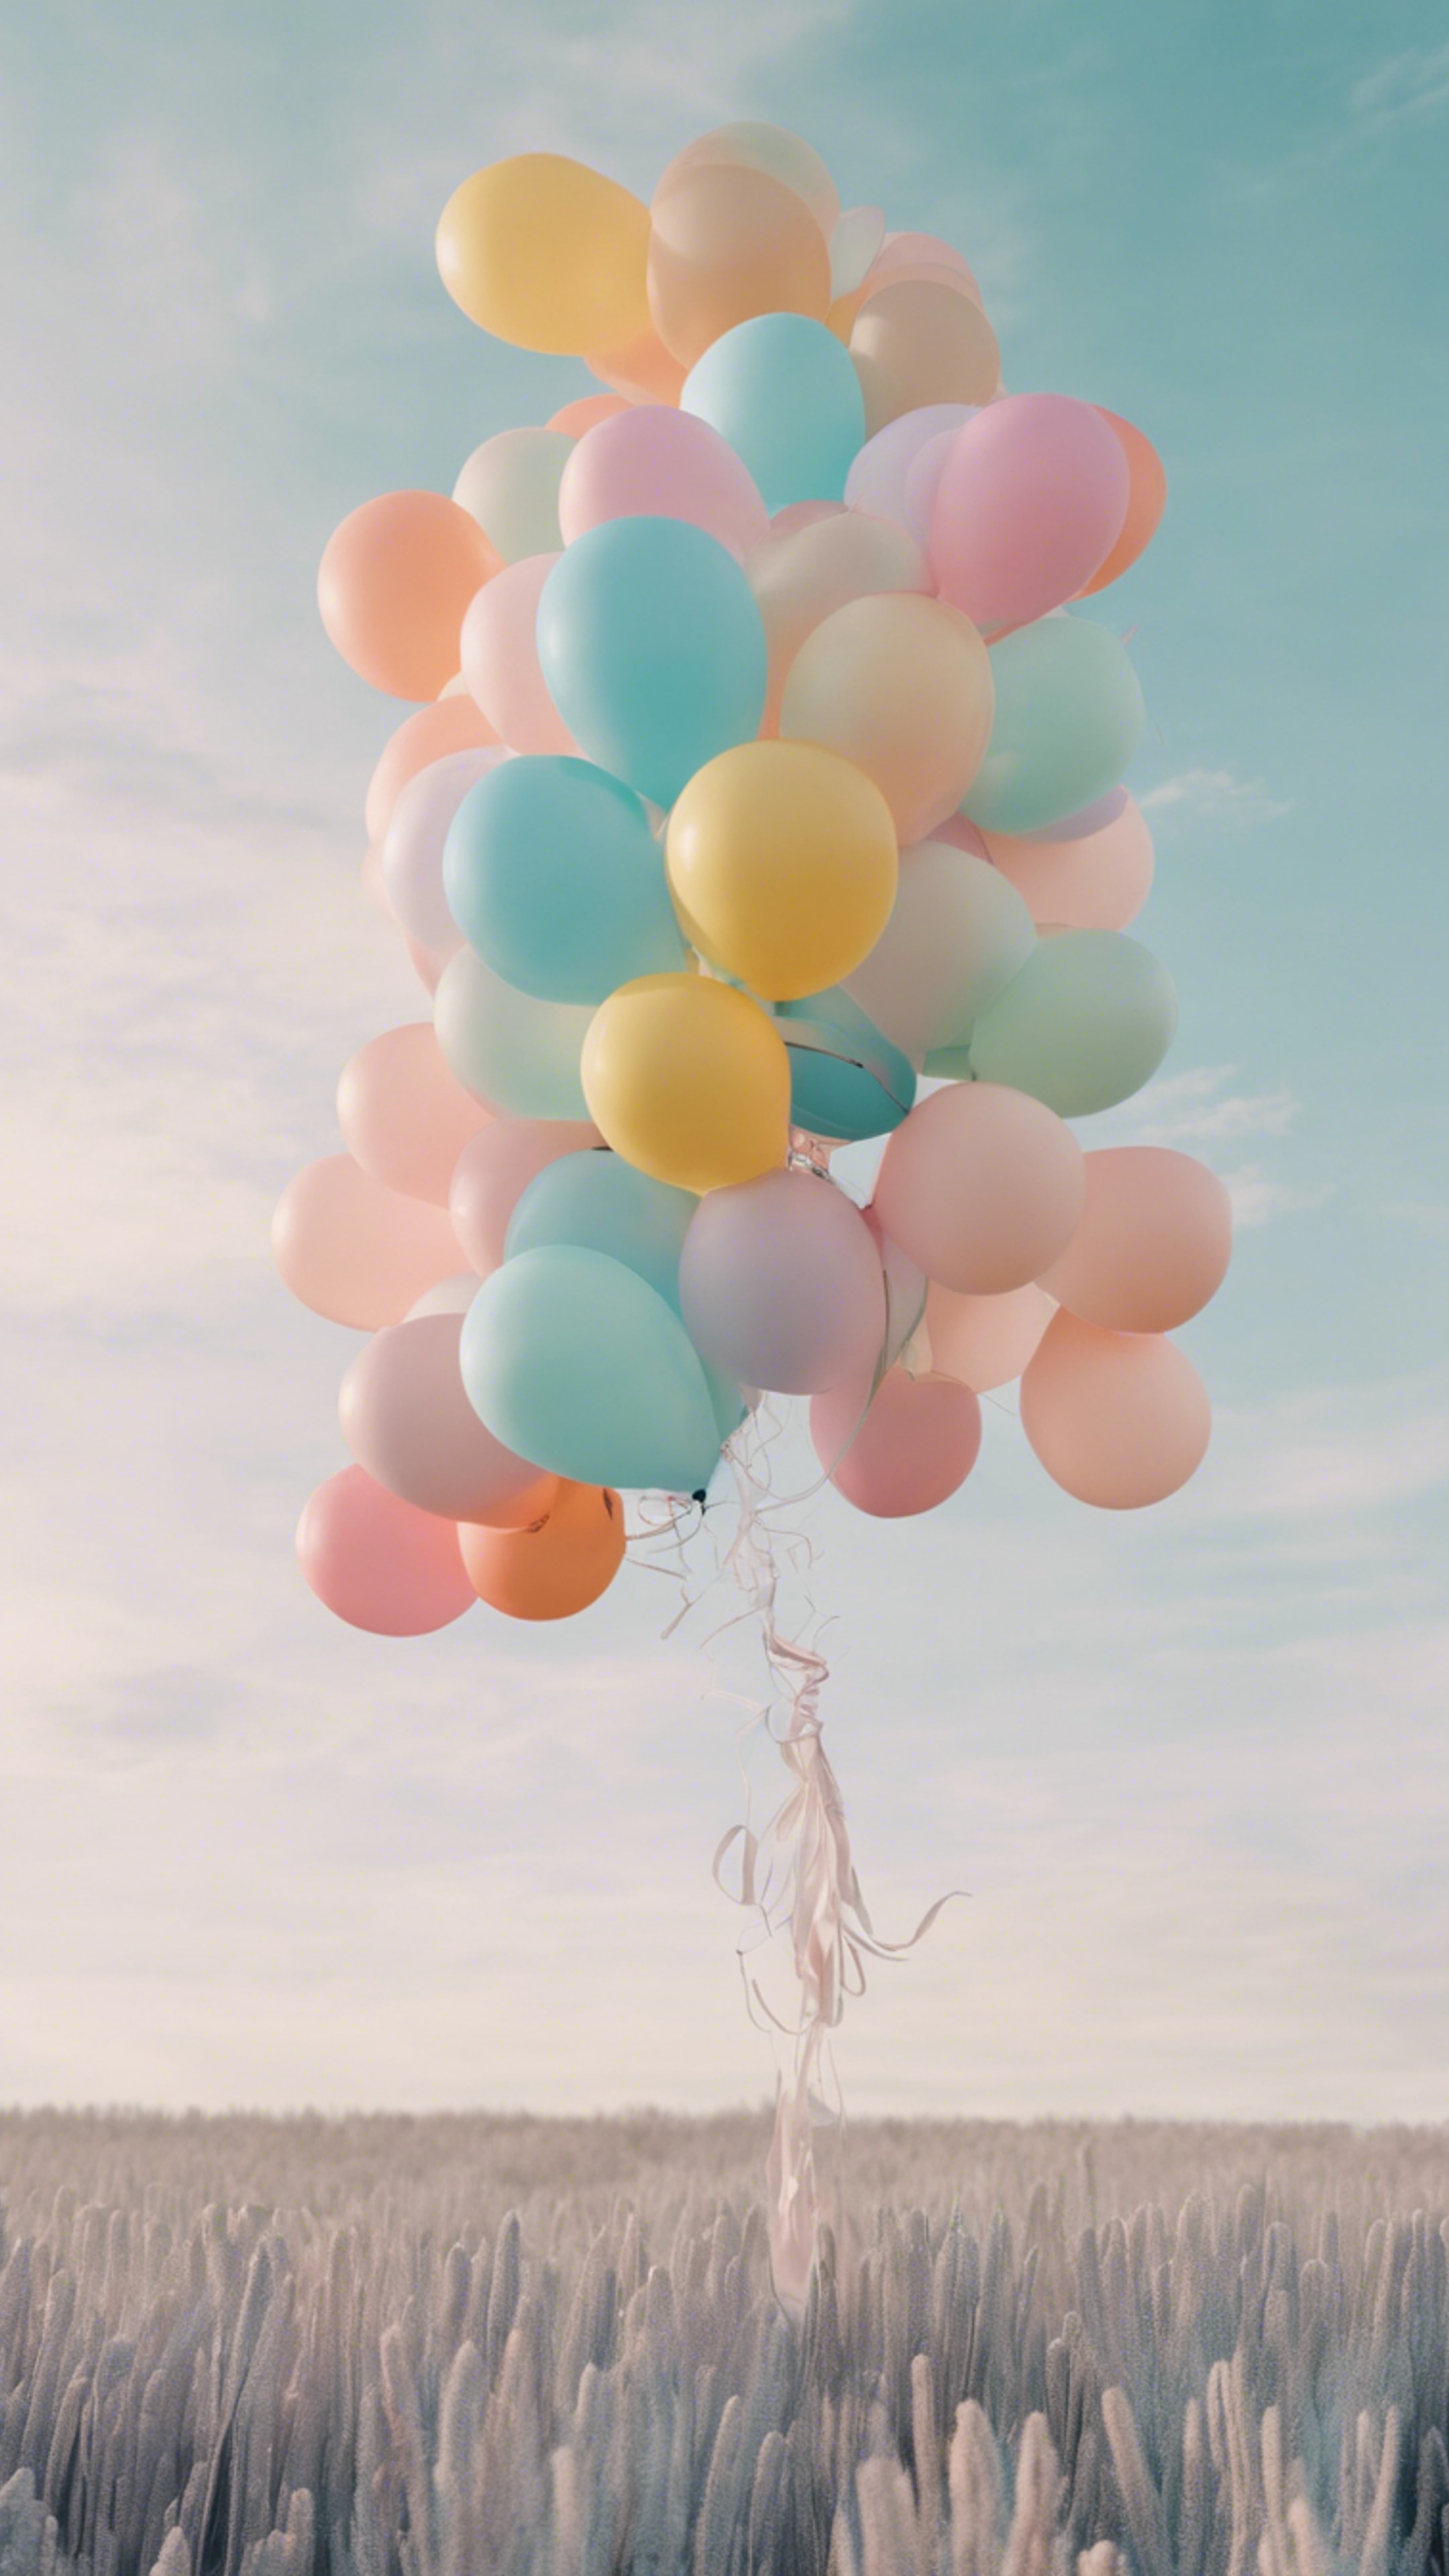 A cool pastel colored cluster of balloons floating in a clear sky. Hình nền[294975c578db48368ab8]